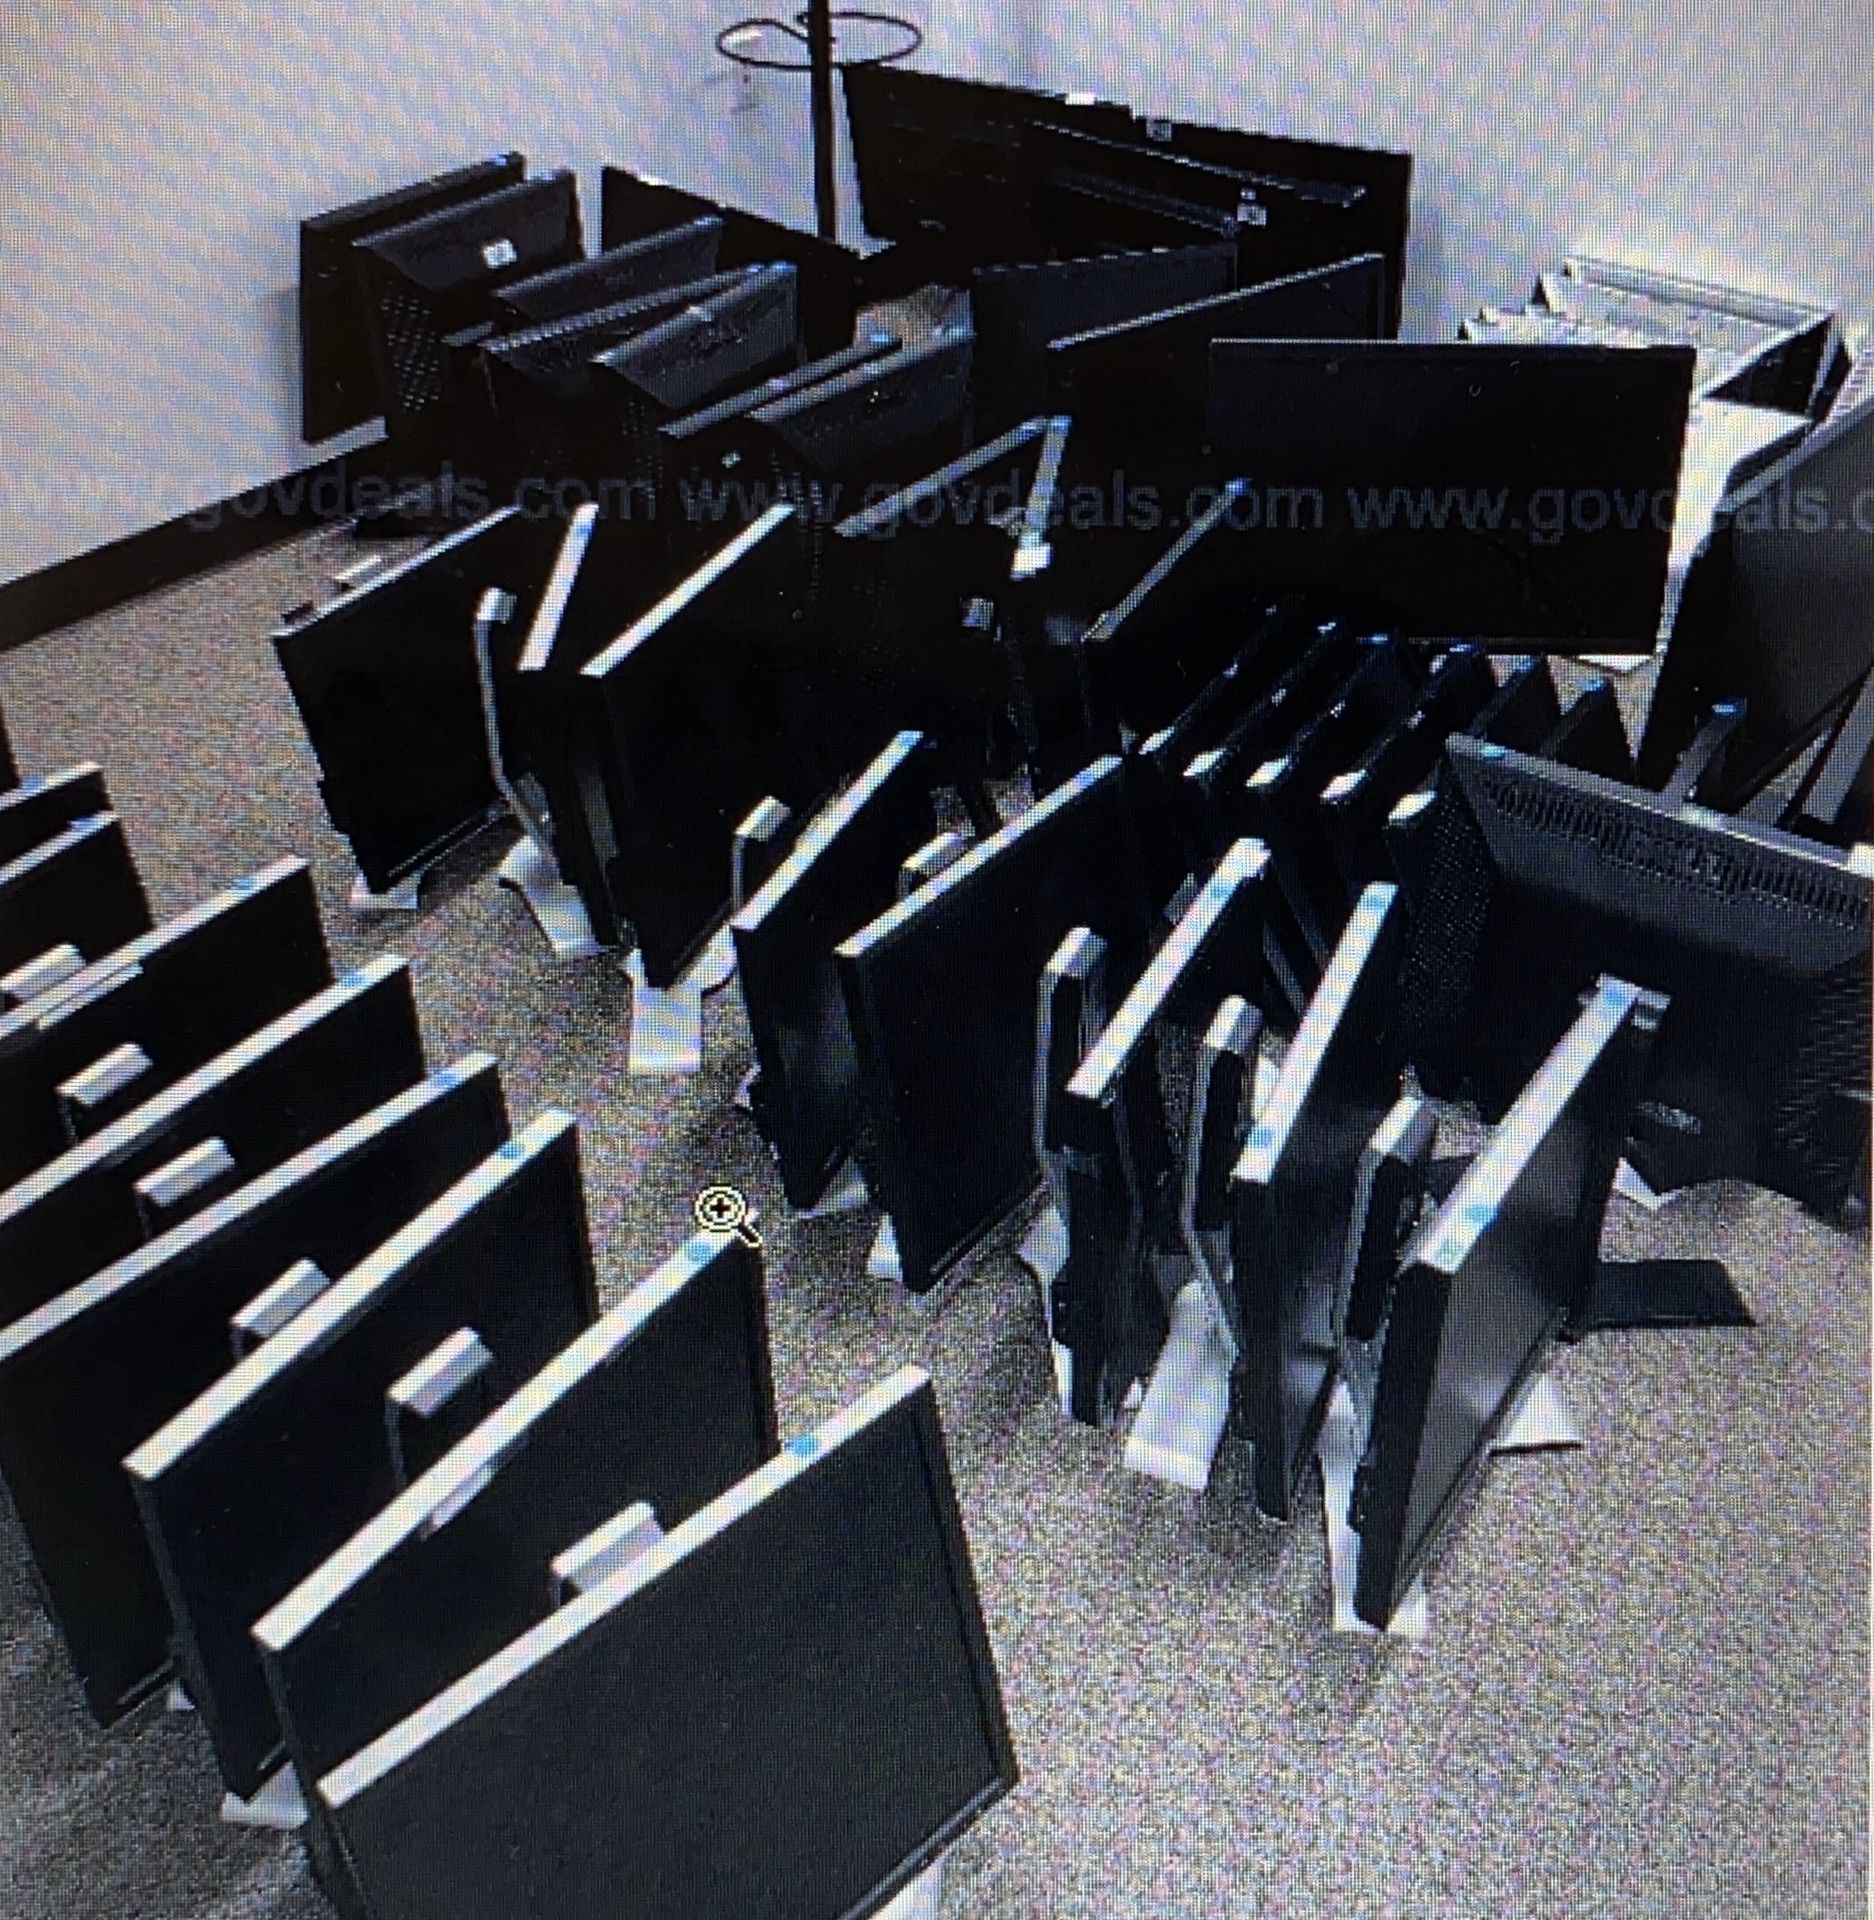 63 pieces of of computer monitors